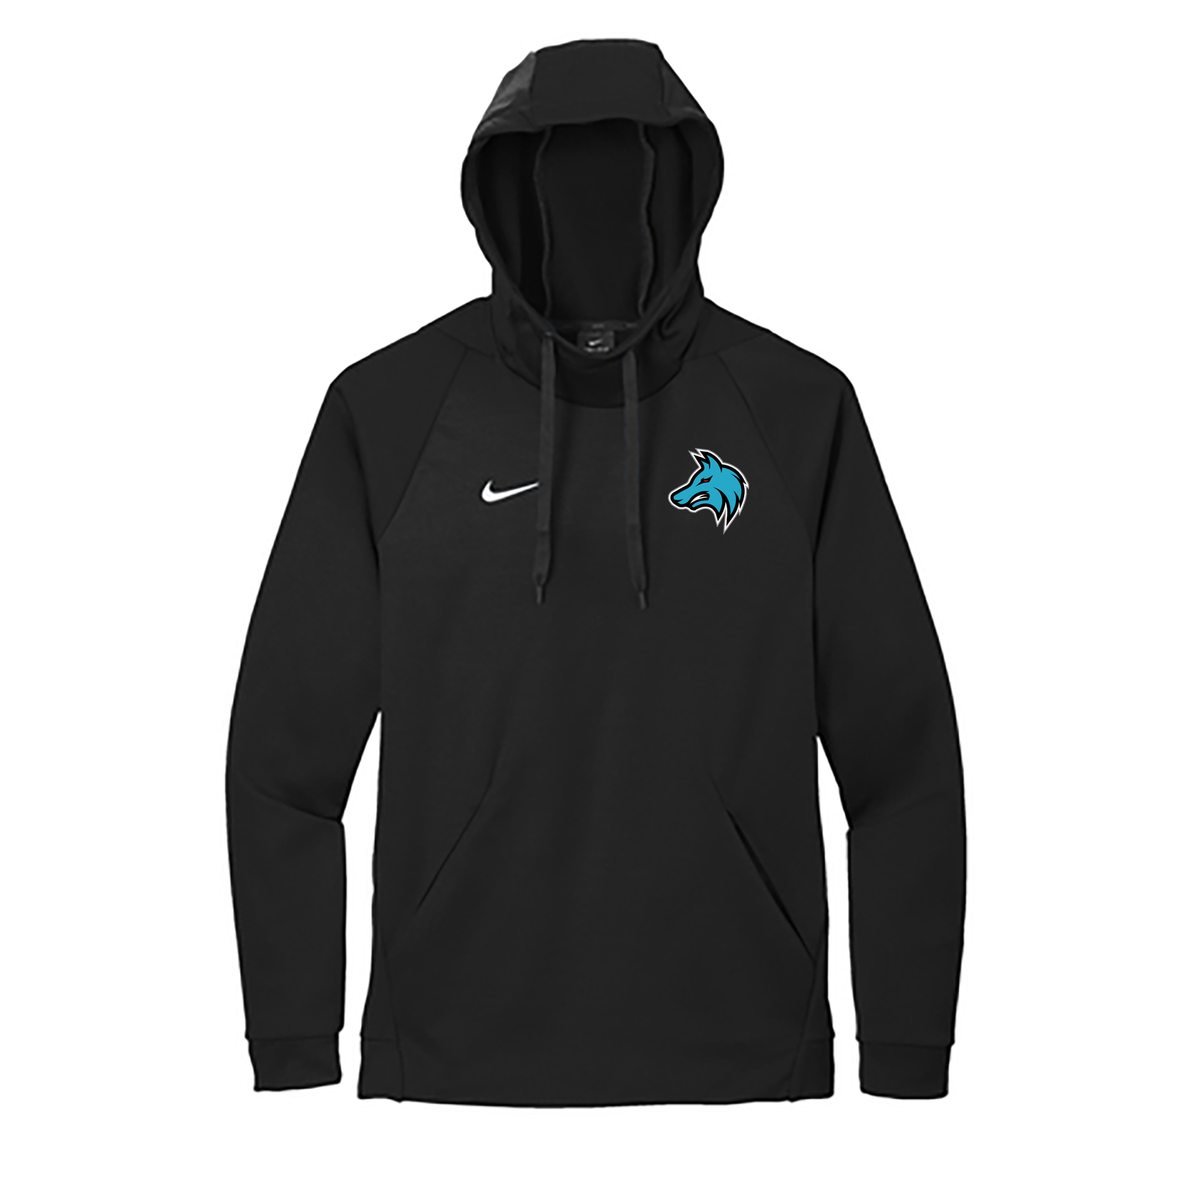 Kansas City Werewolves Nike Therma-FIT Embroidered Hoodie